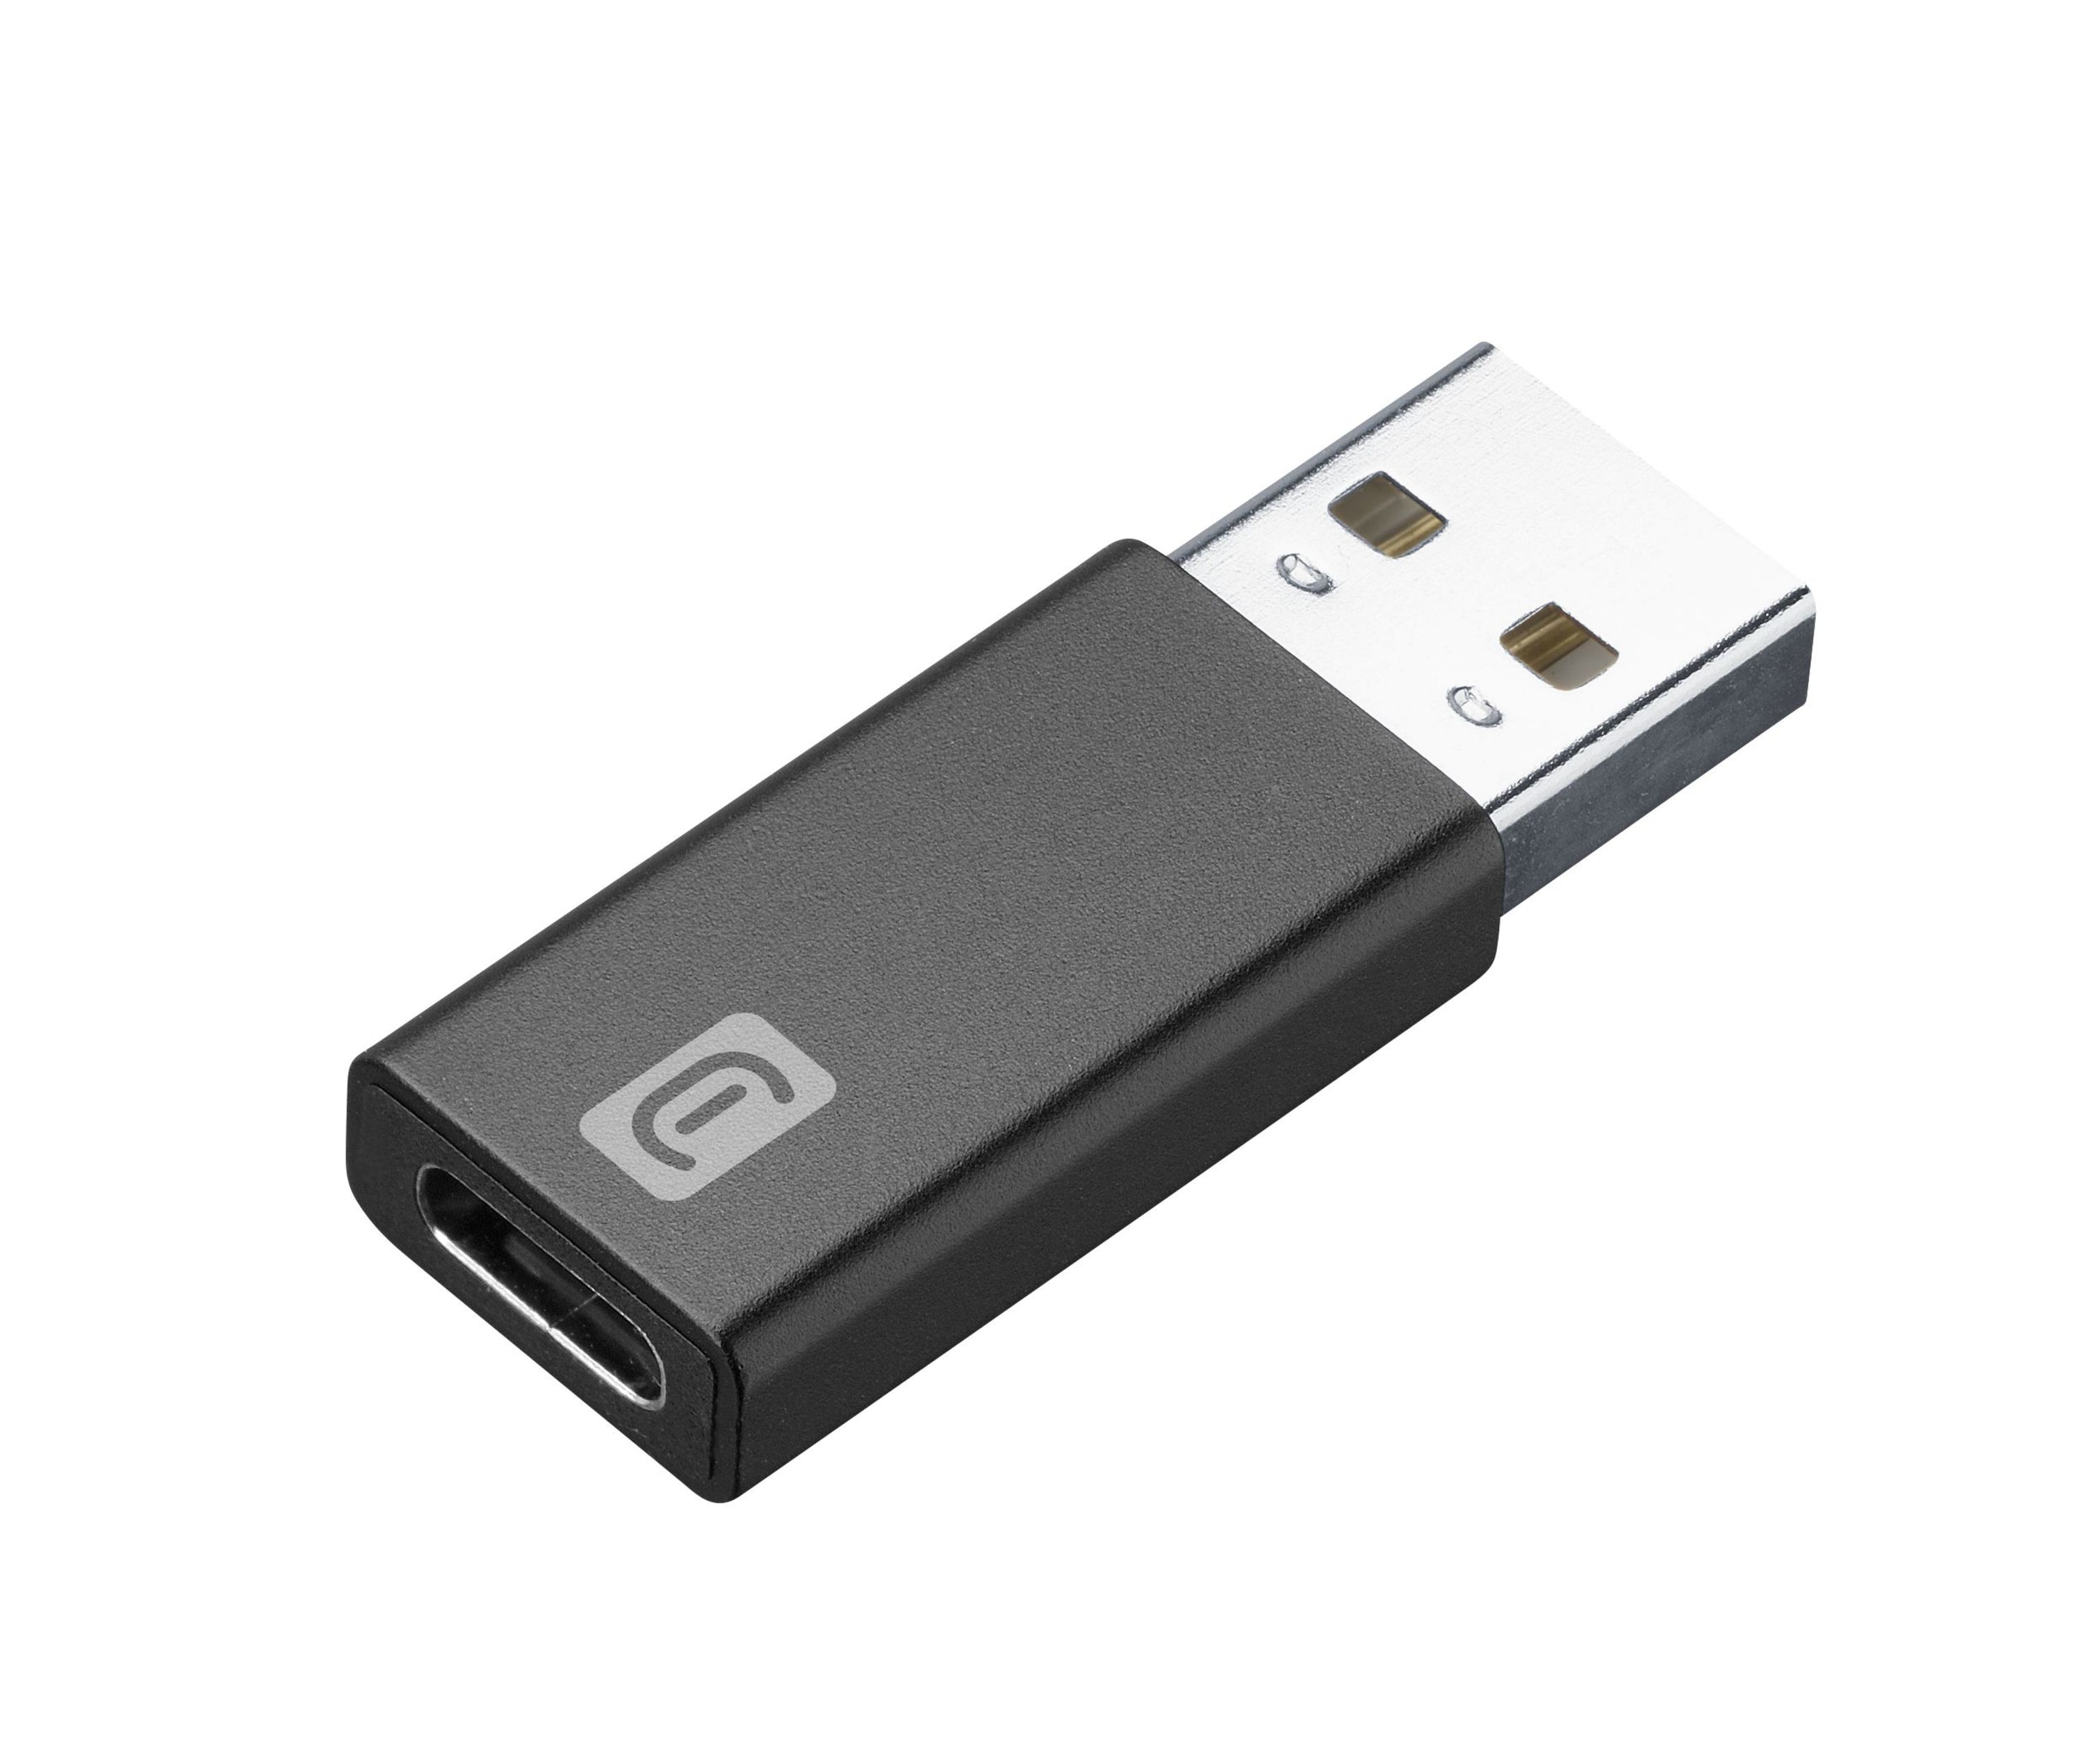  Usb-a To Usb-c Adapter